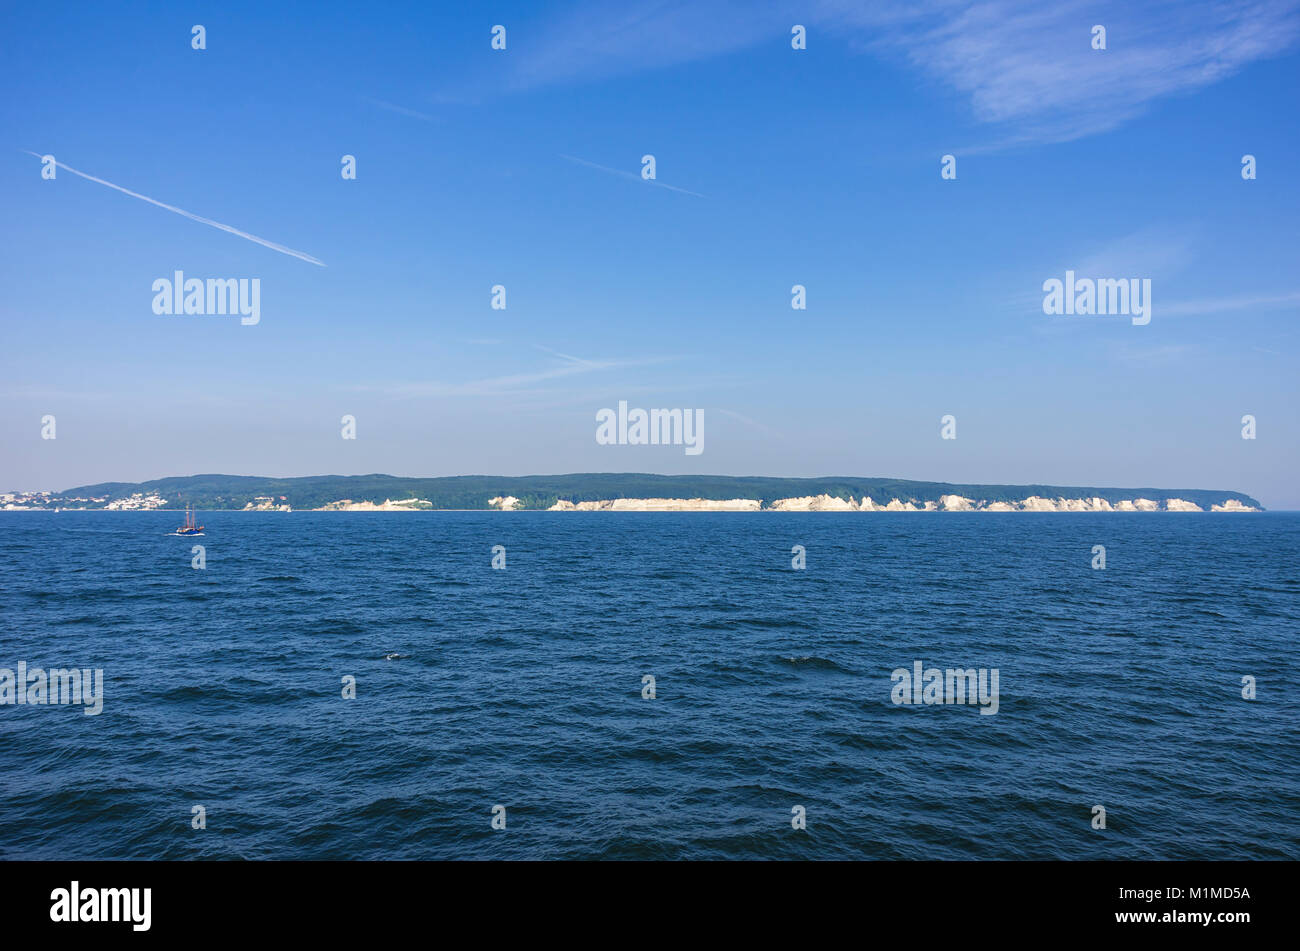 Coastscape of the Isle of Rügen, Mecklenburg-Pomerania, Germany, as see from the open sea. Stock Photo